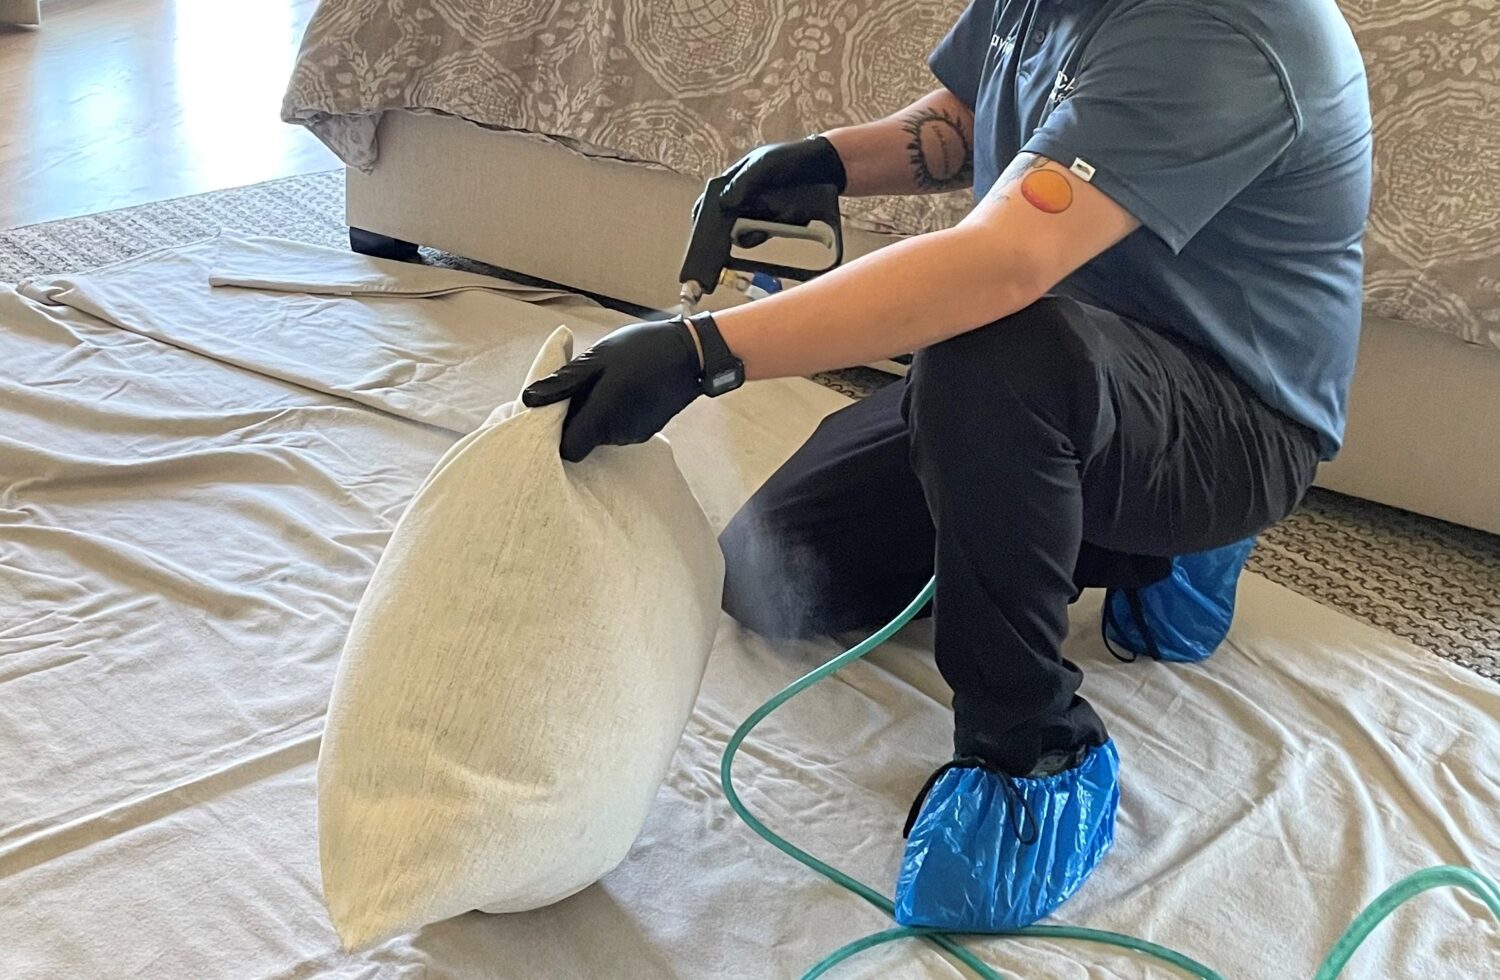 Technician applies fabric protection to a white cushion.